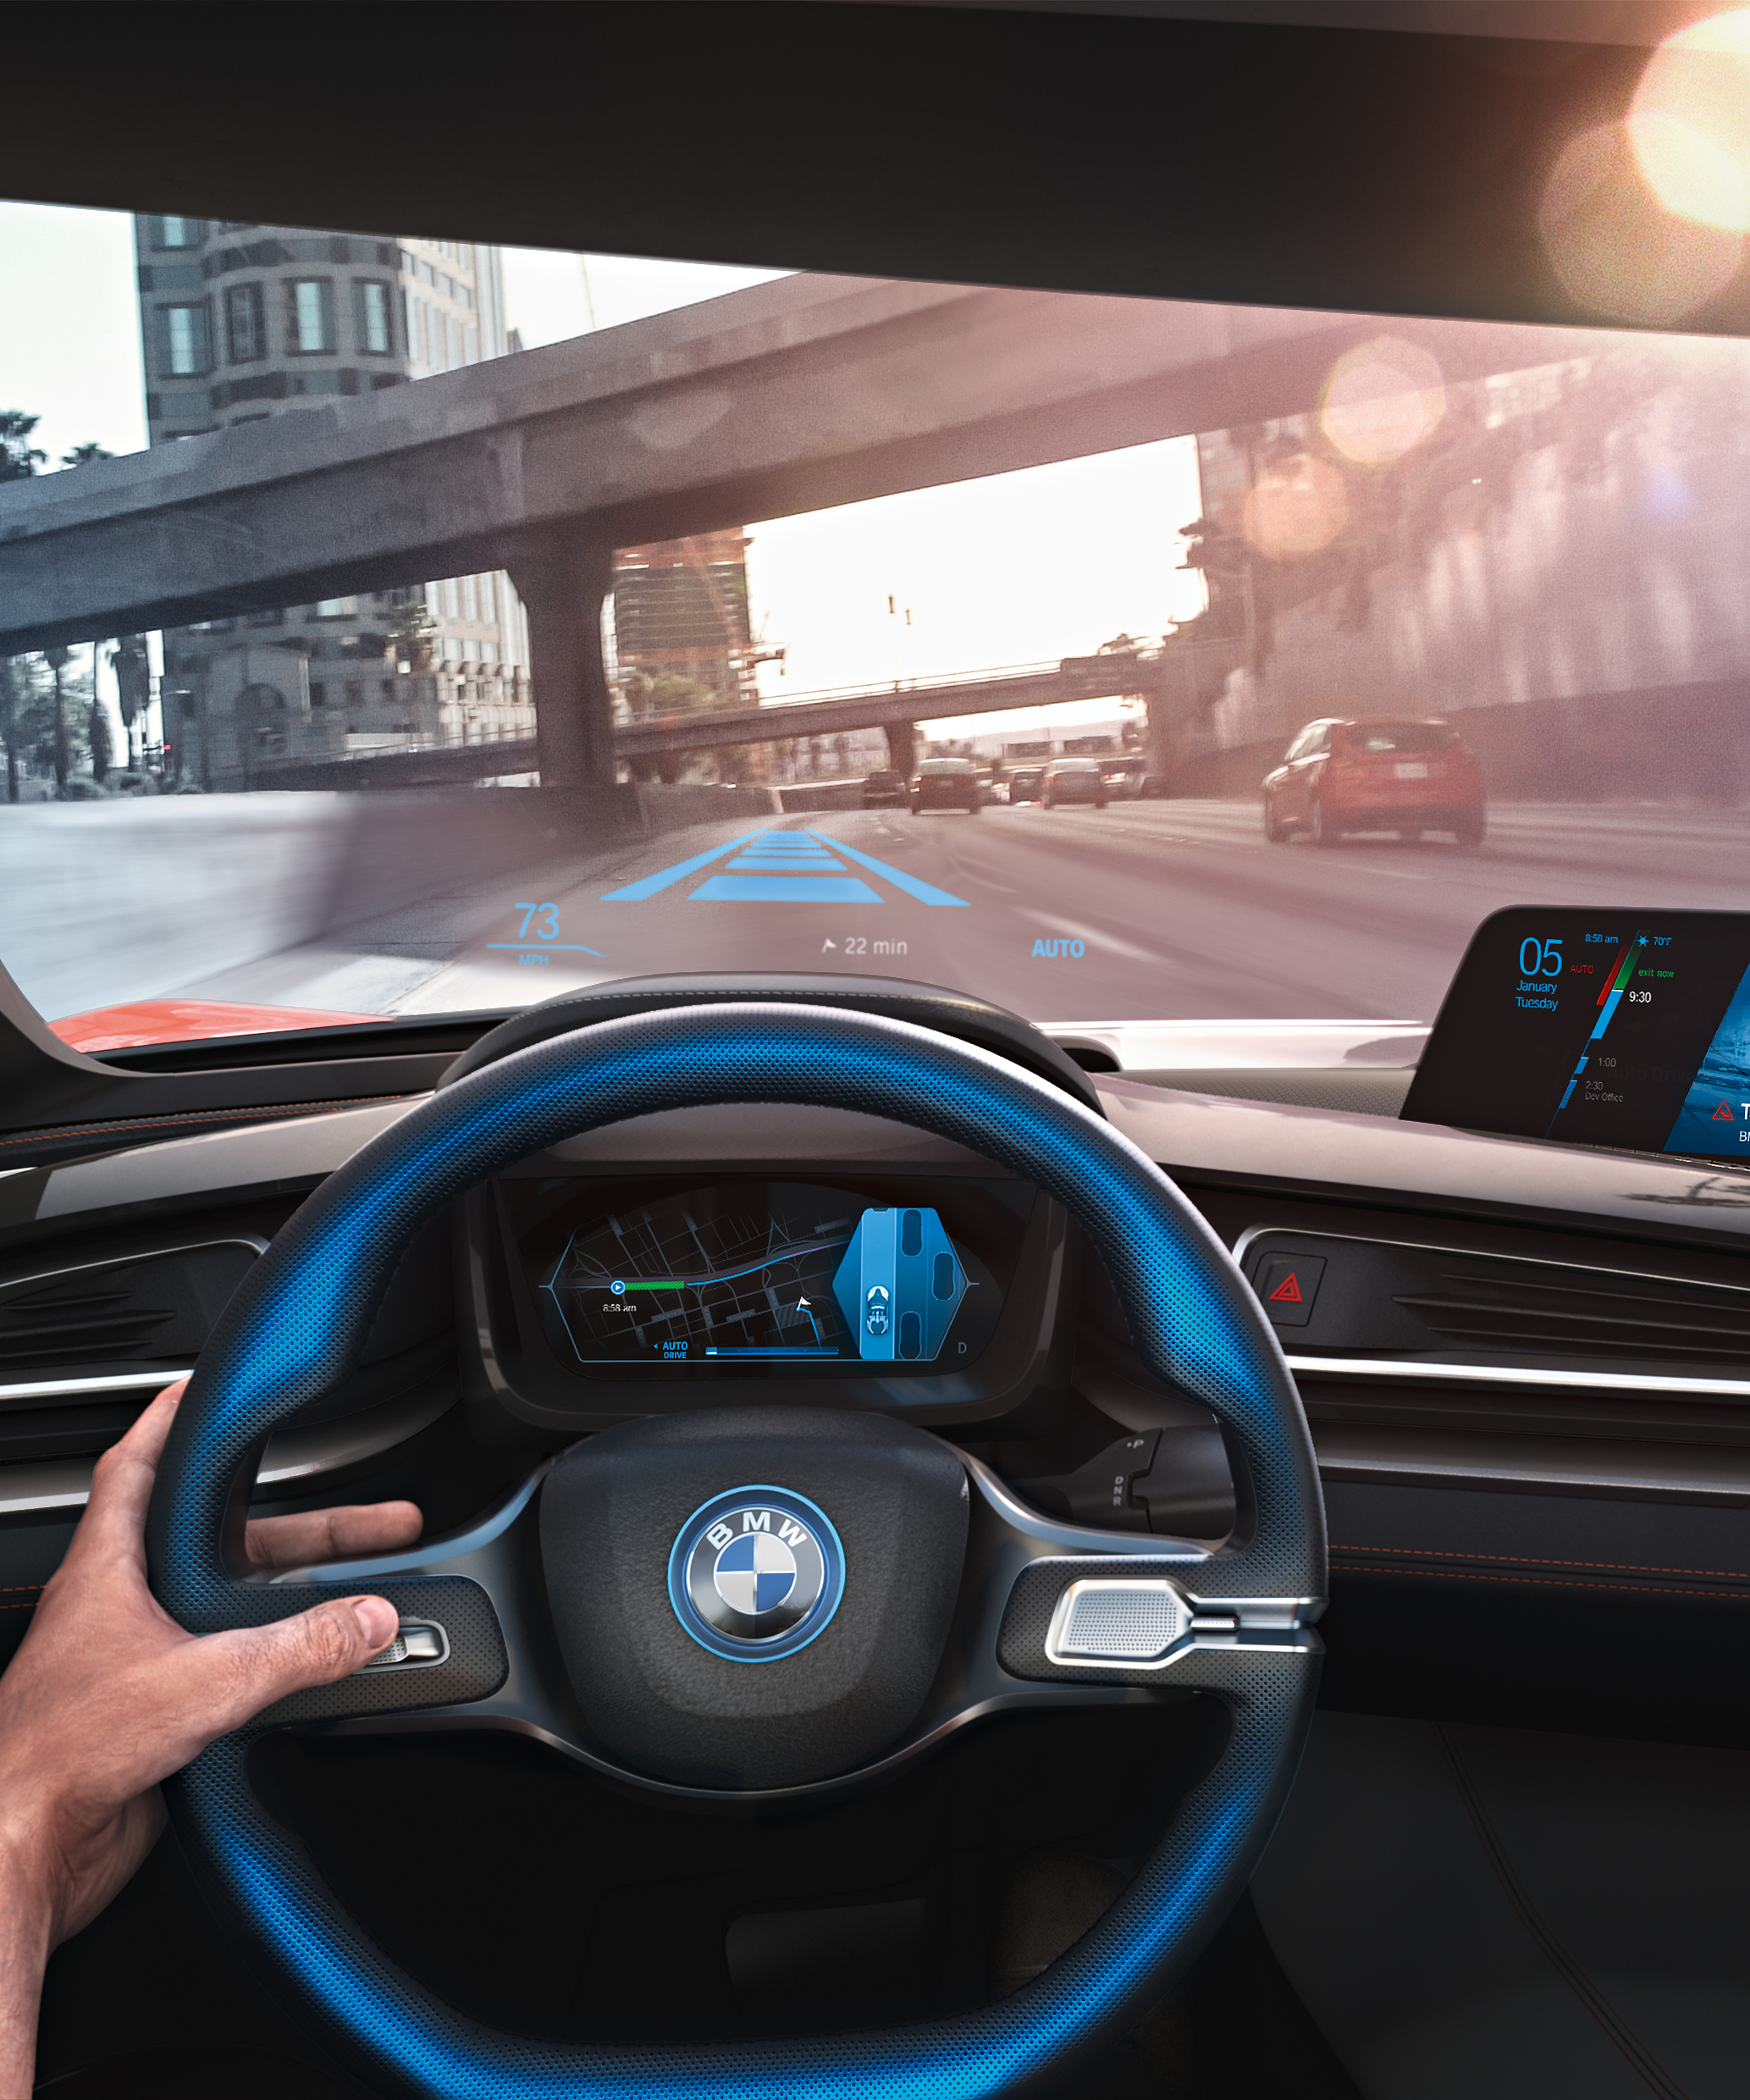 BMW teams up with intel and mobileye to make self-driving vehicles a reality